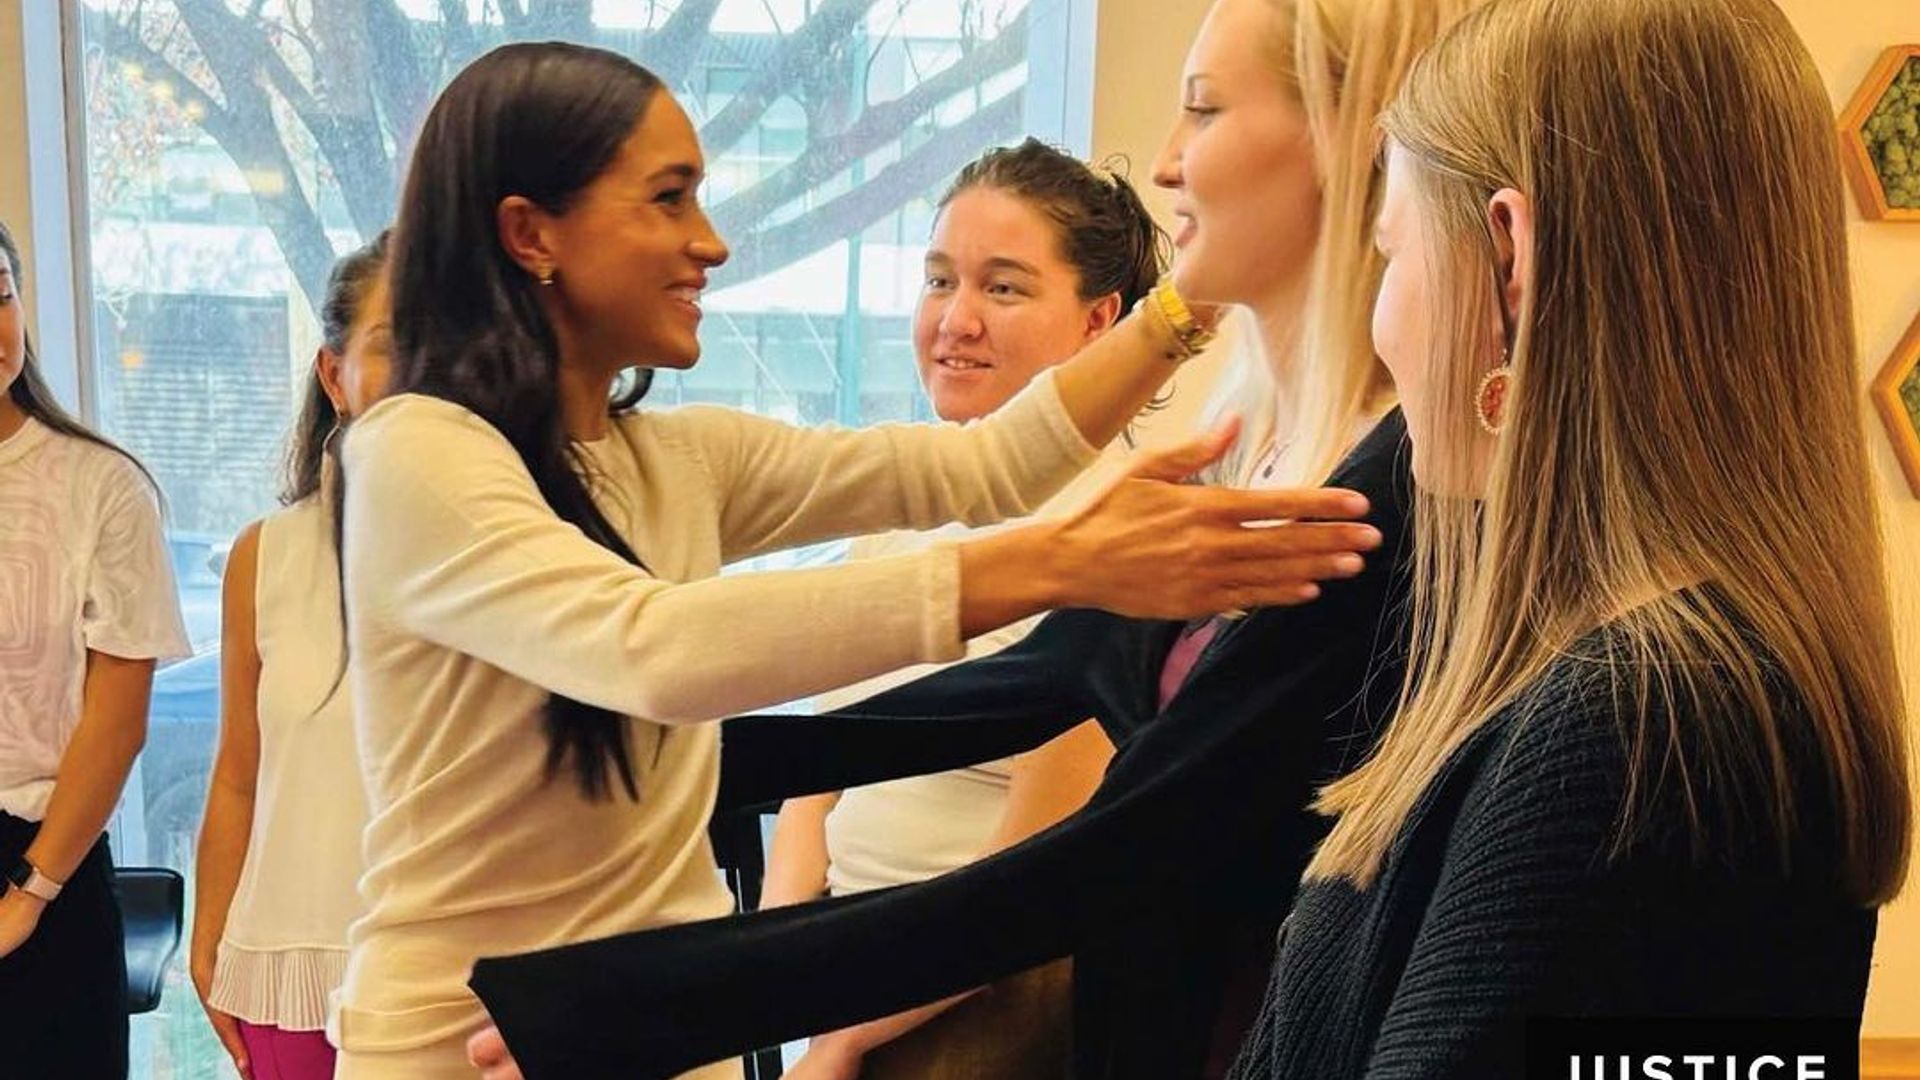 Meghan reaches out to hug the girls at her recent visit to Justice for Girls charity